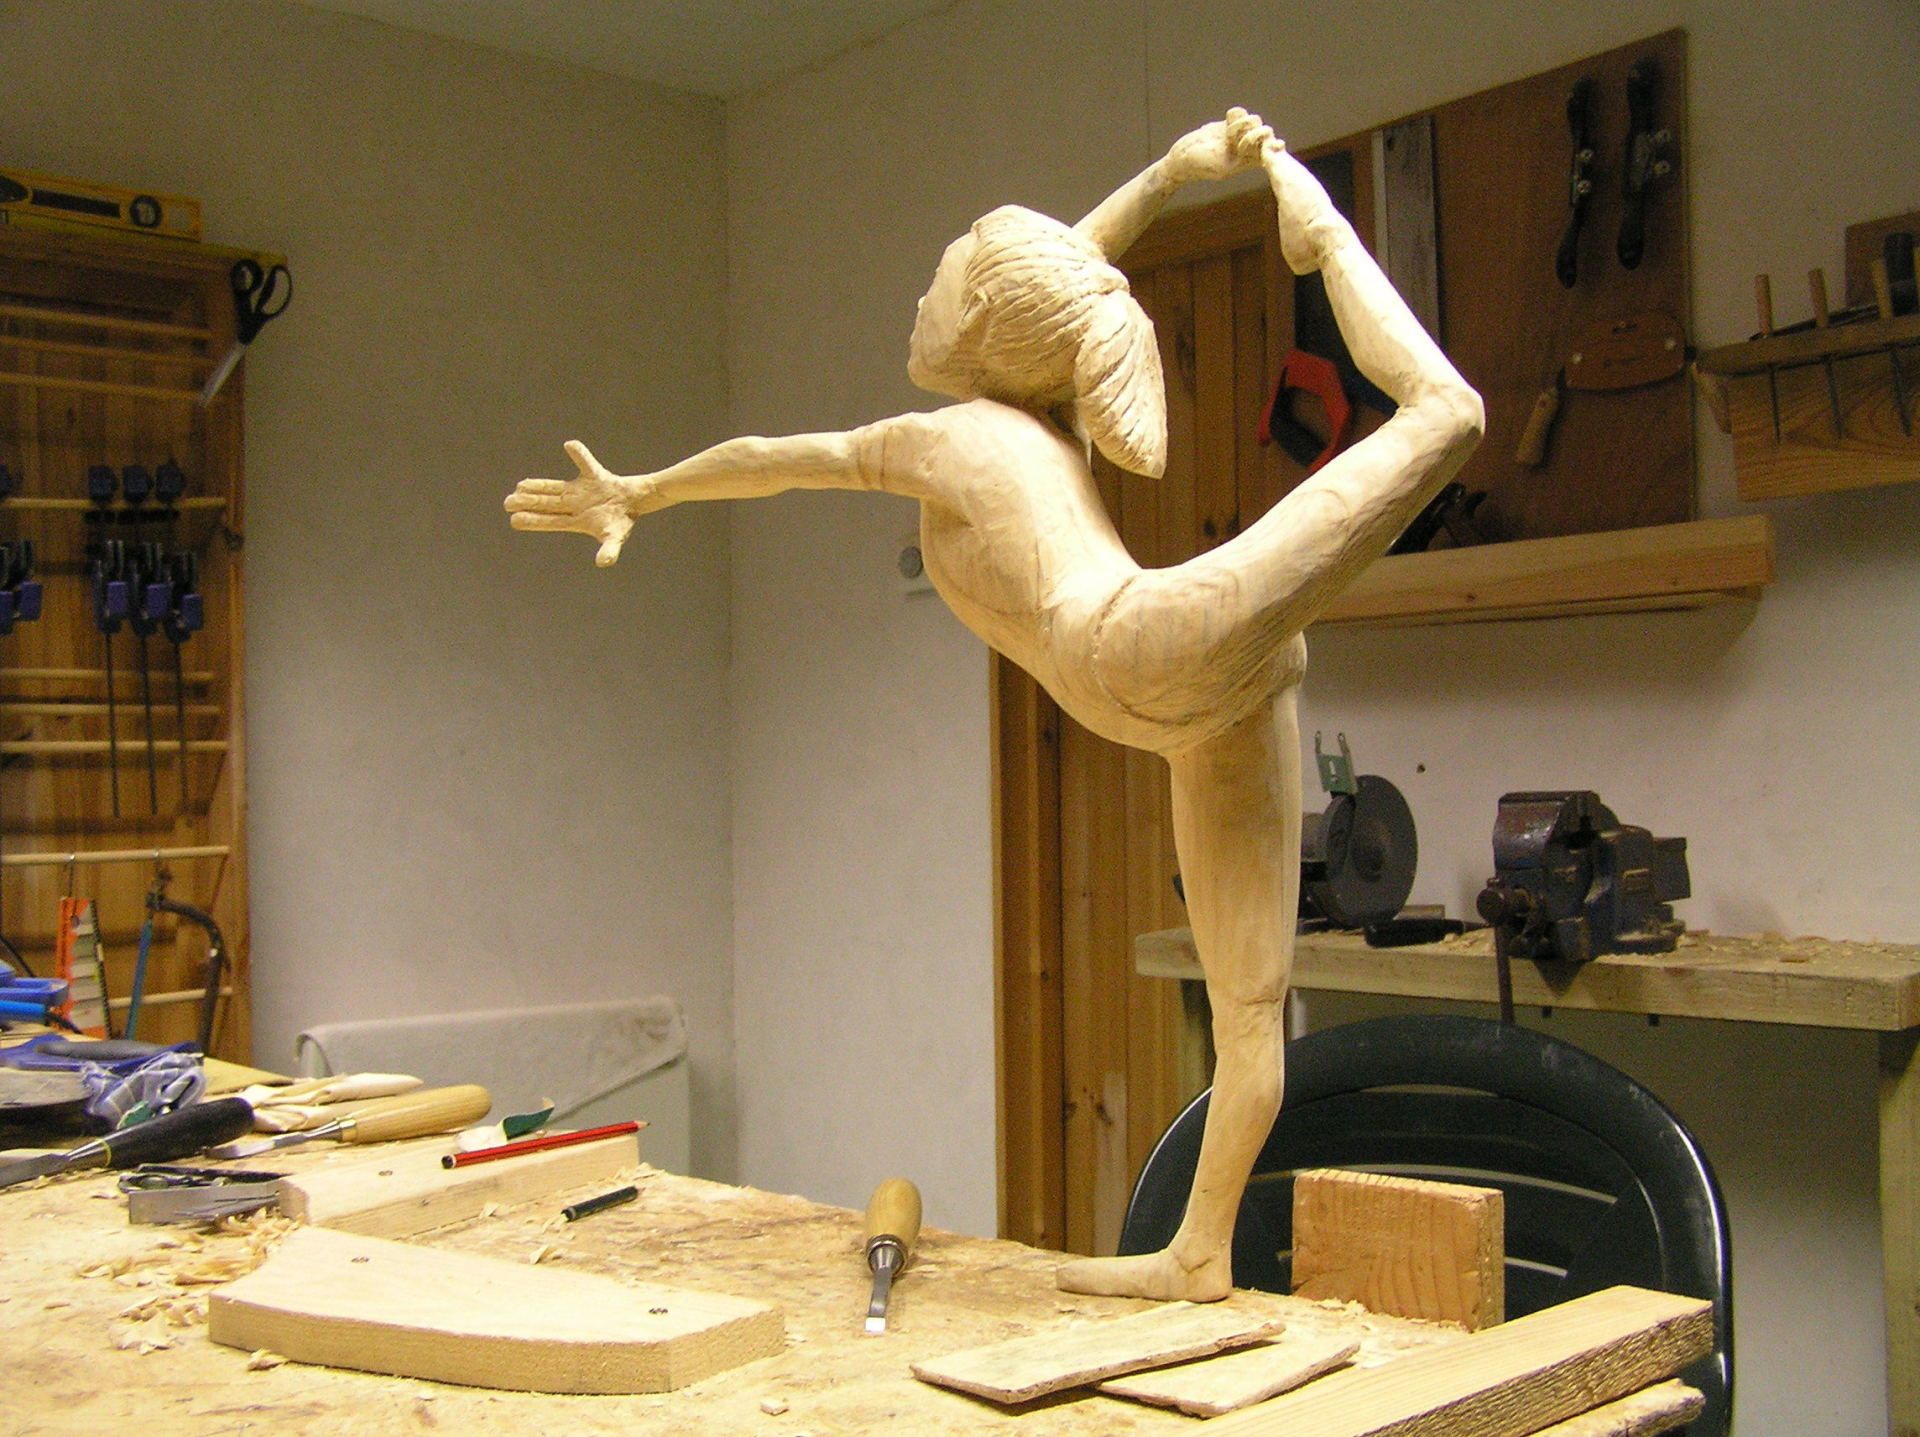 Gymnast wooden sculpture by Ingrained Culture.